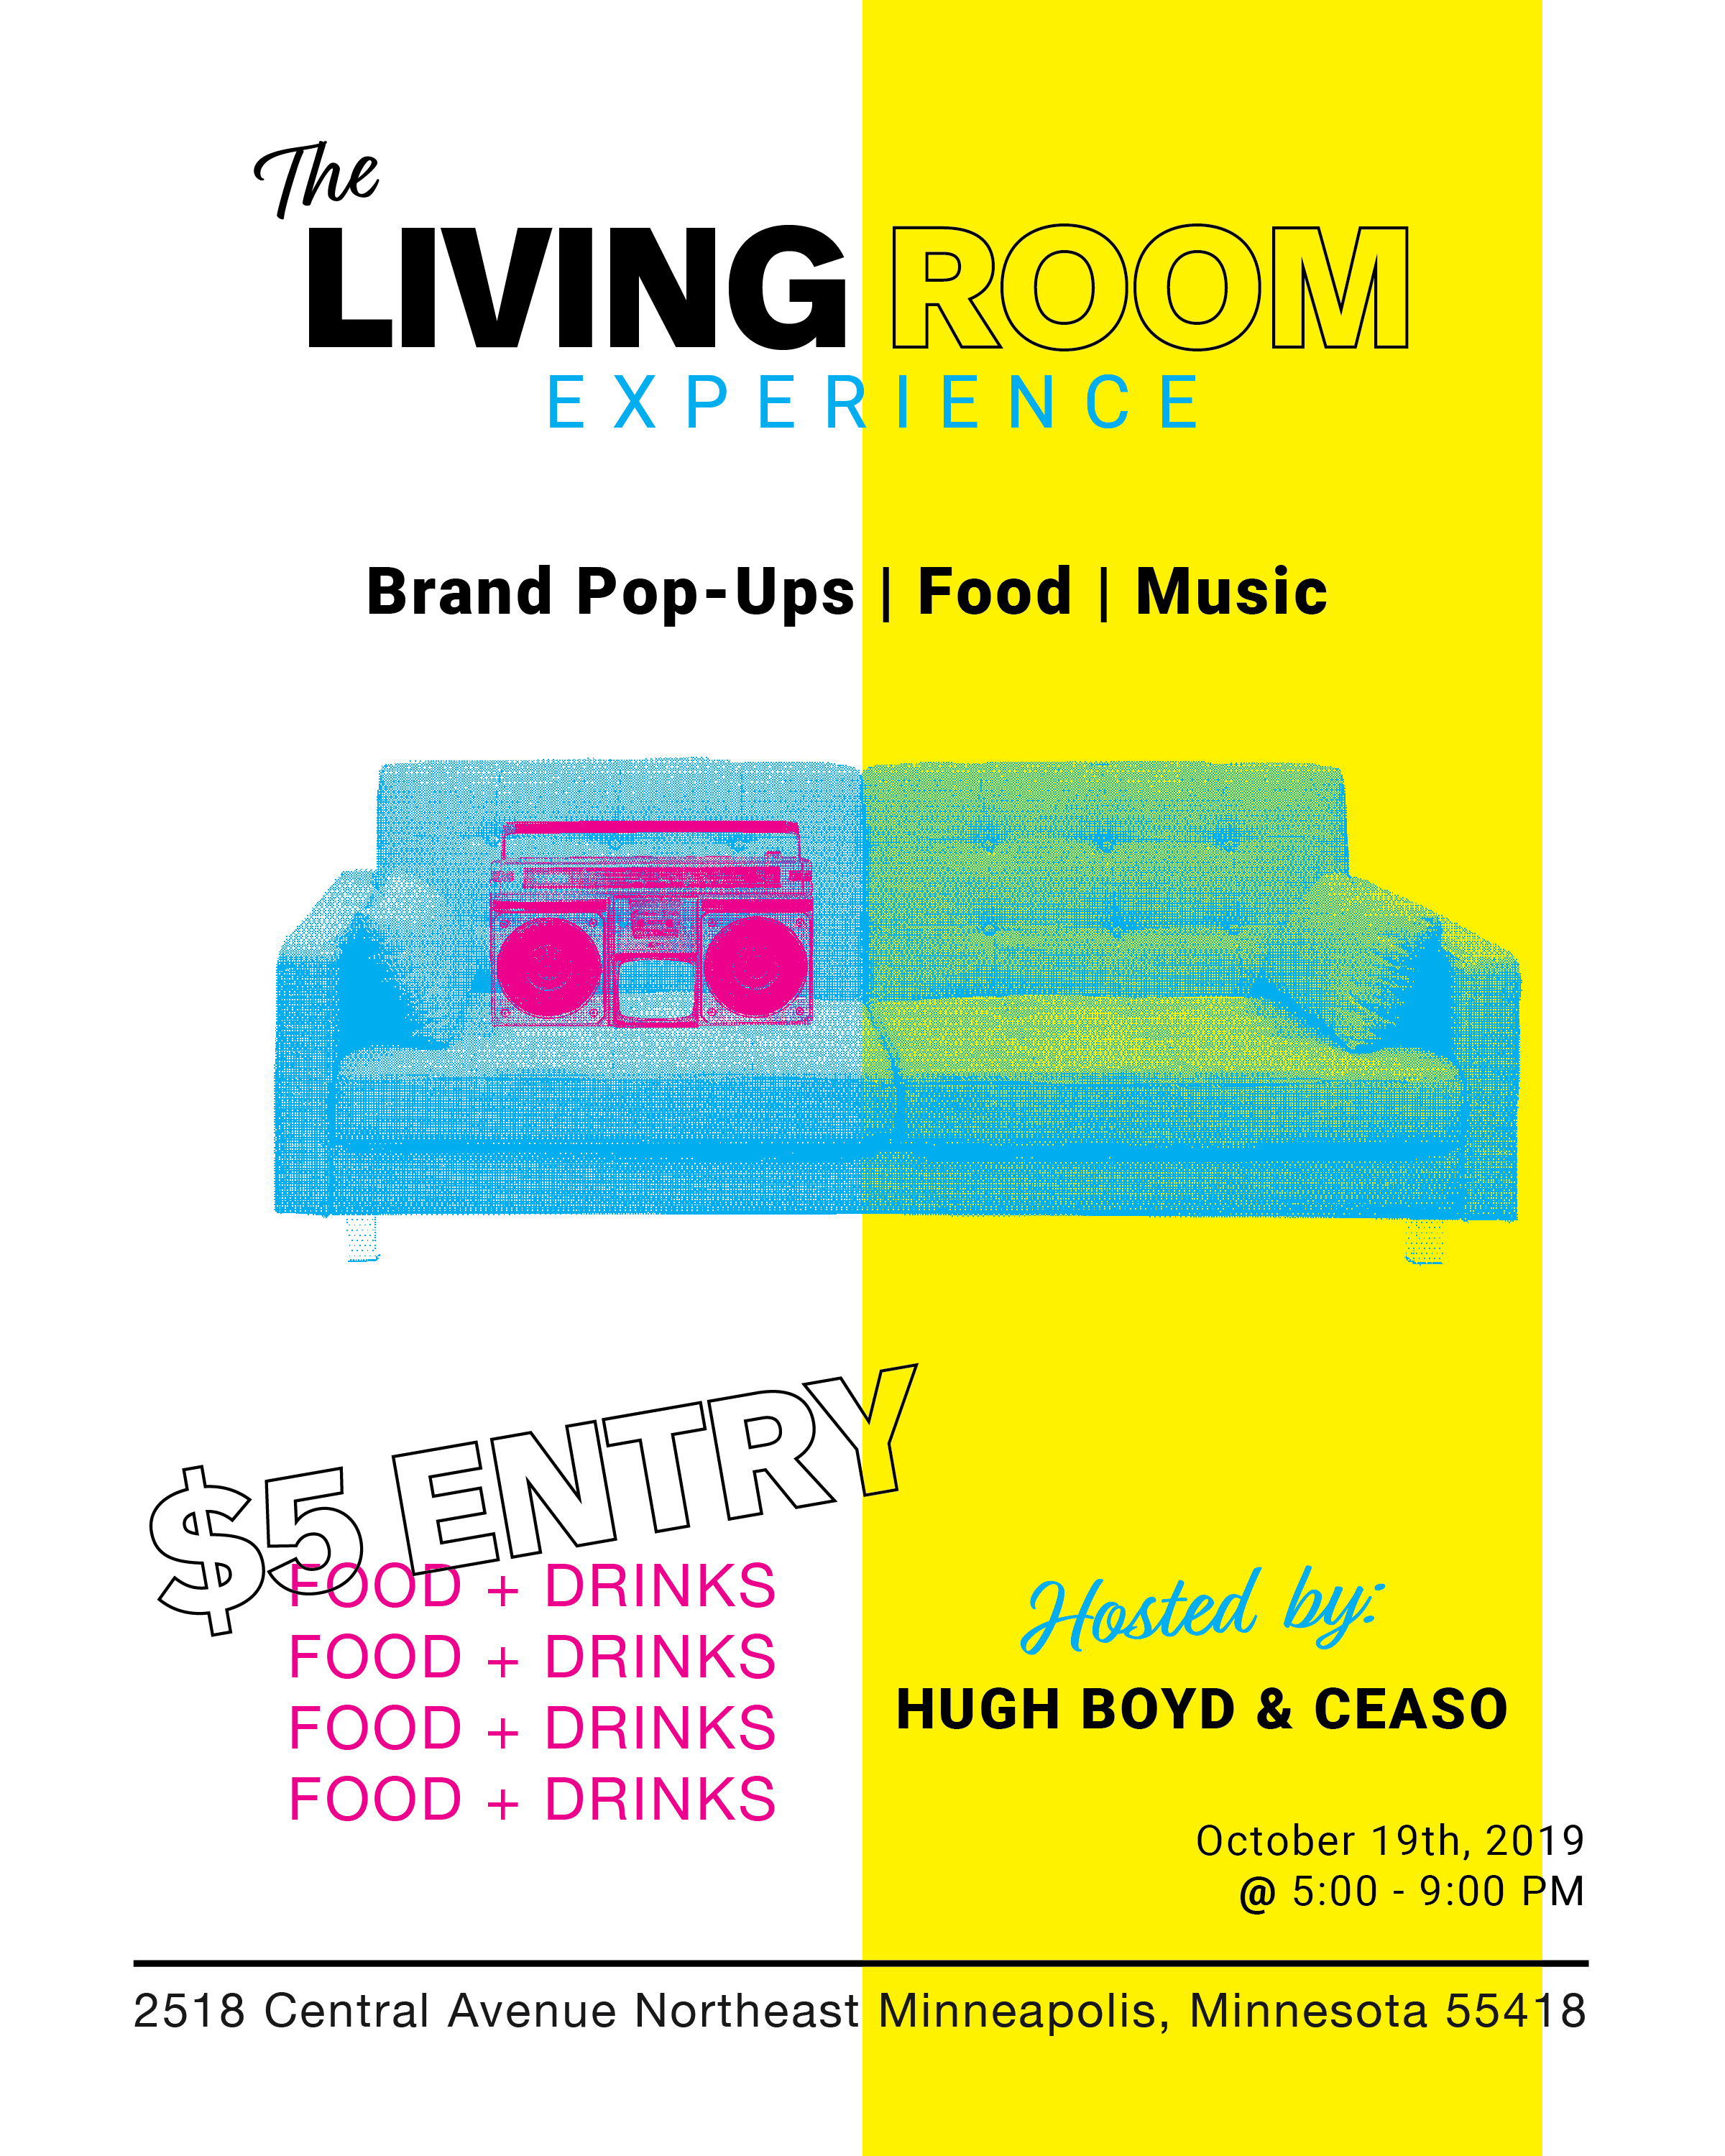 Thelivingroom_expierence_flyer-01.jpg